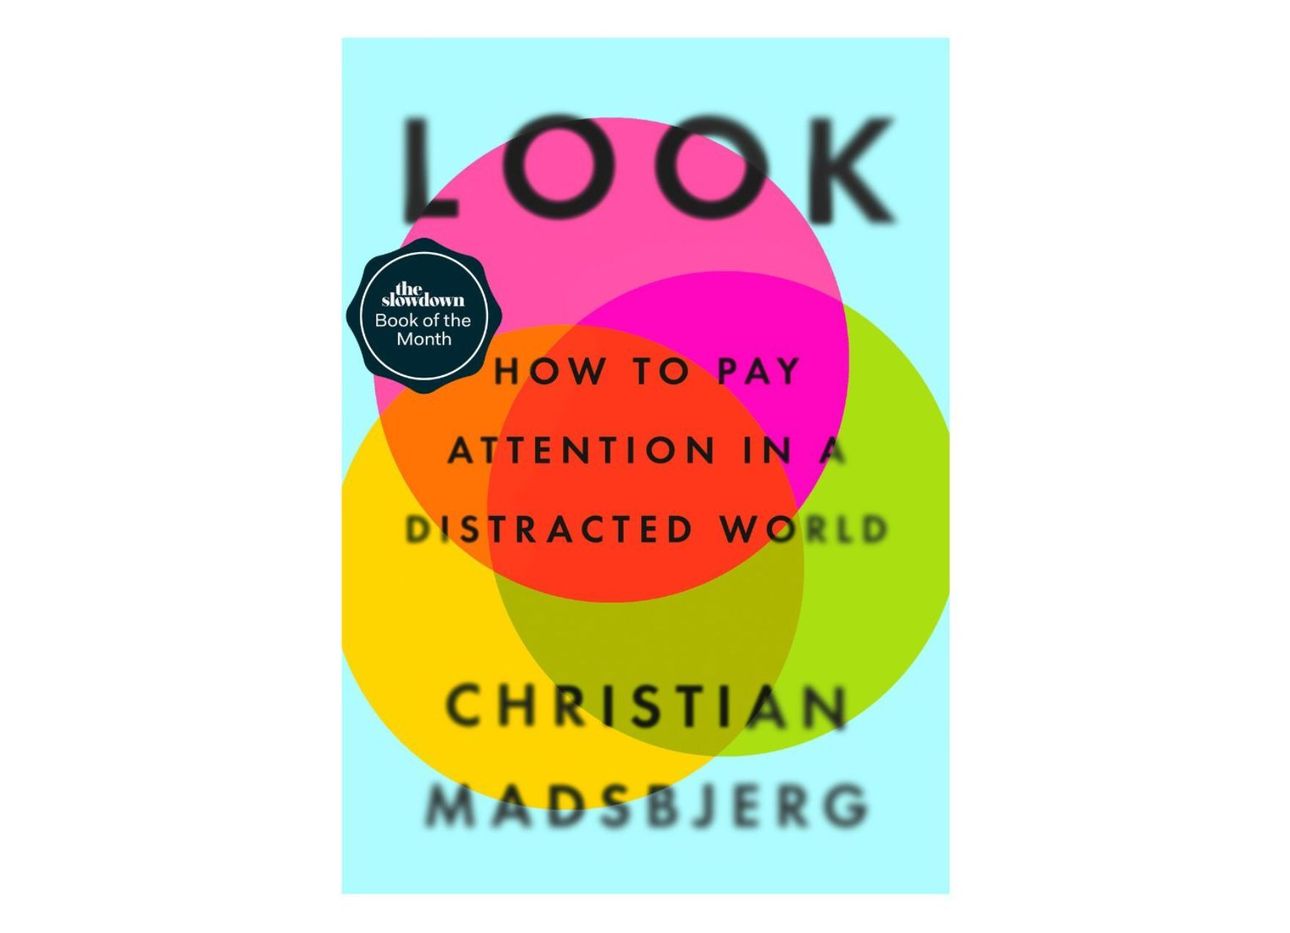 Cover of “Look: How to Pay Attention in a Distracted World” by Christian Madsbjerg. (Courtesy Riverhead Books)